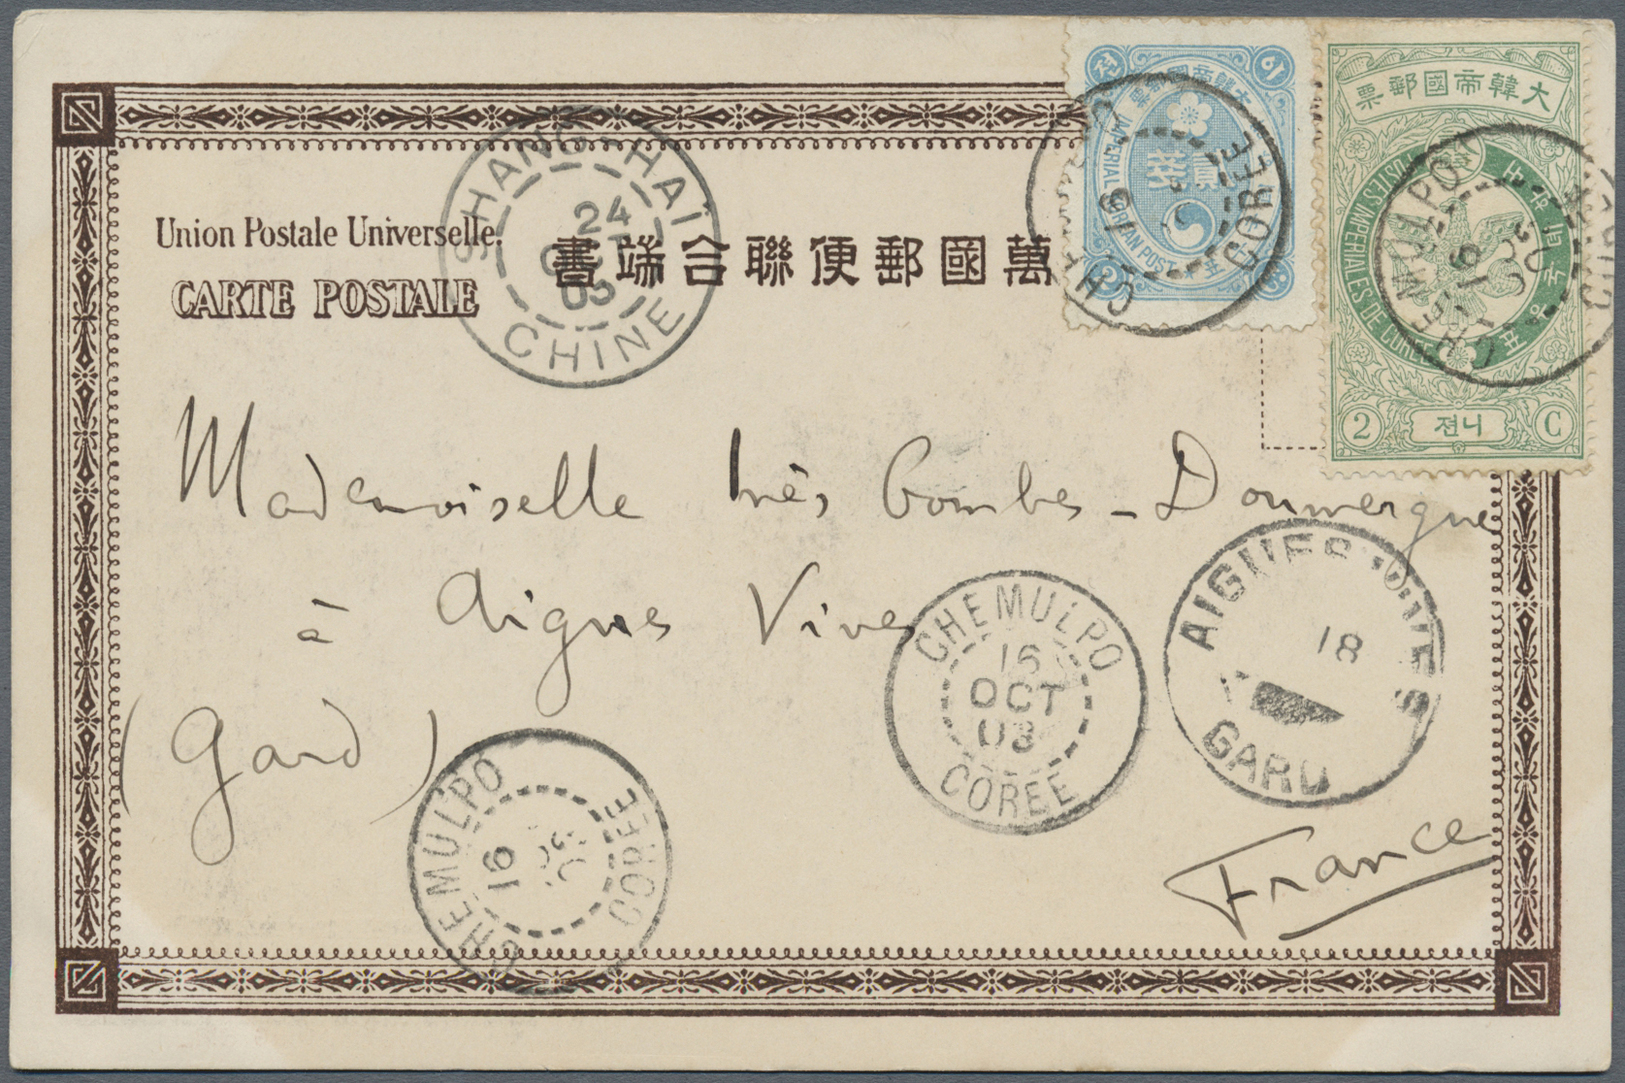 Br Korea: 1905. Multi View Picture Post Card Of 'Street Scene And Out Going Girl' Addressed To France Bearing Korea SG 2 - Corée (...-1945)